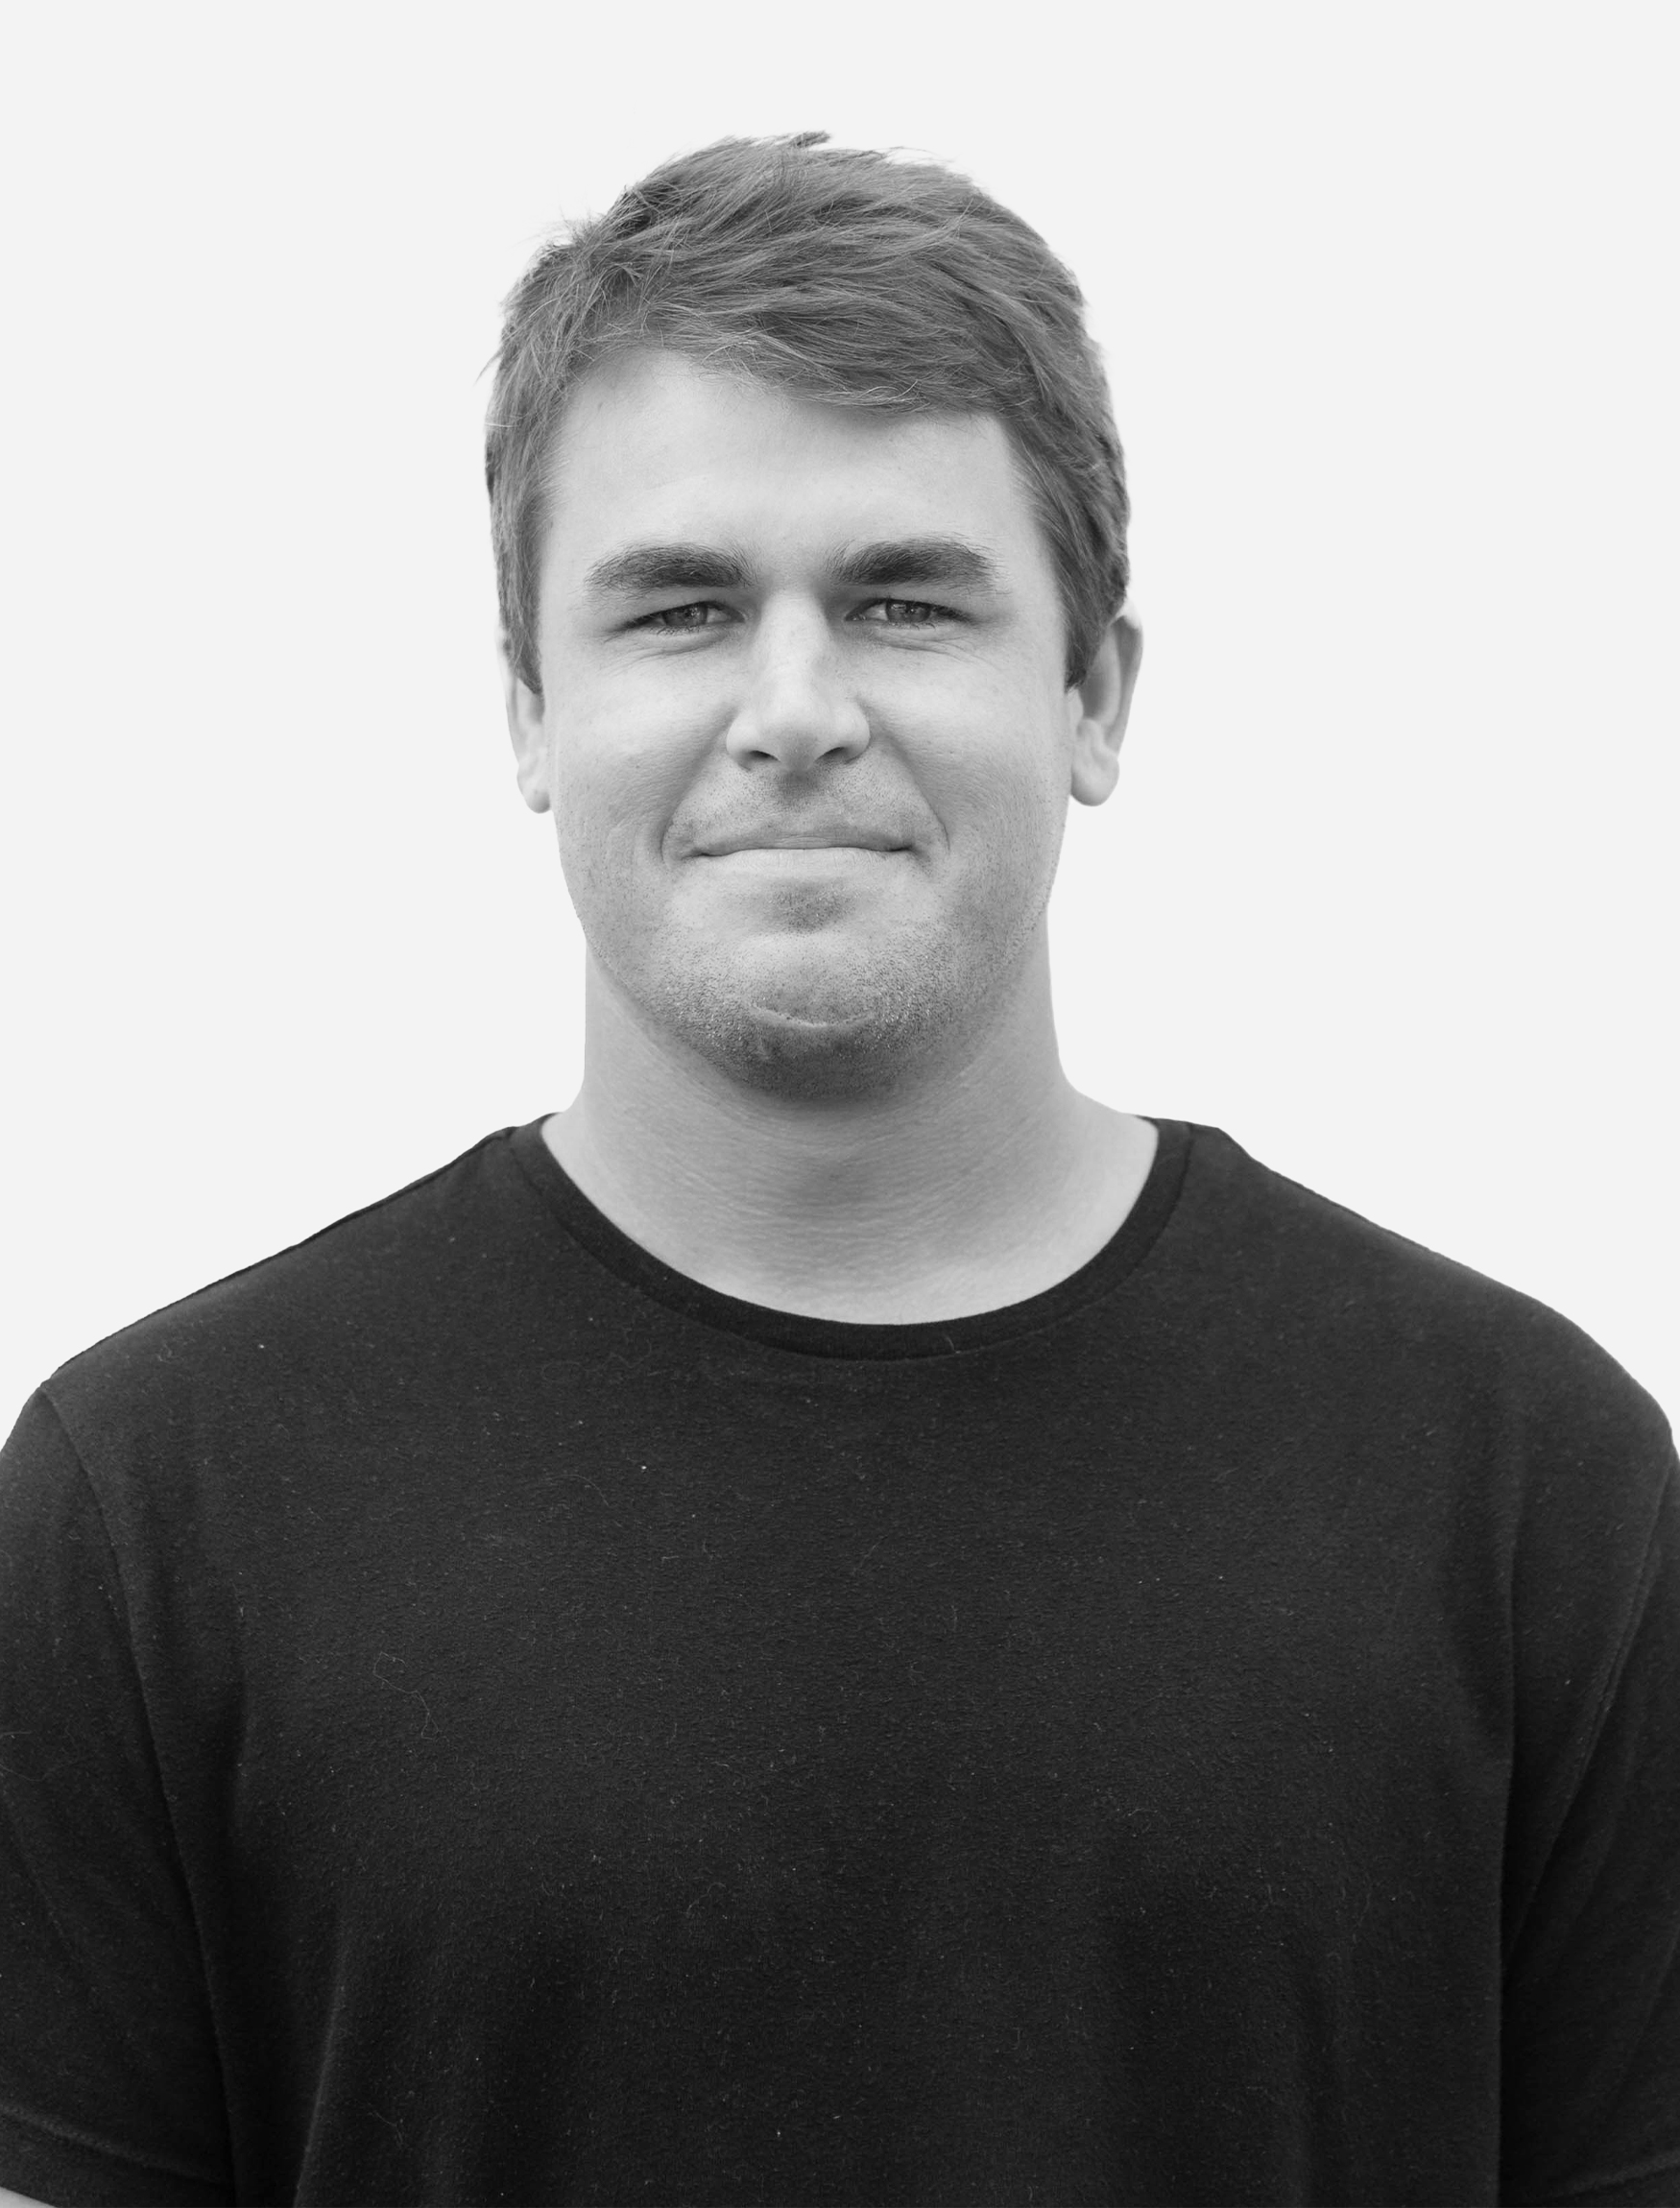 Black and white headshot image of Will Heinze from RSM Design.